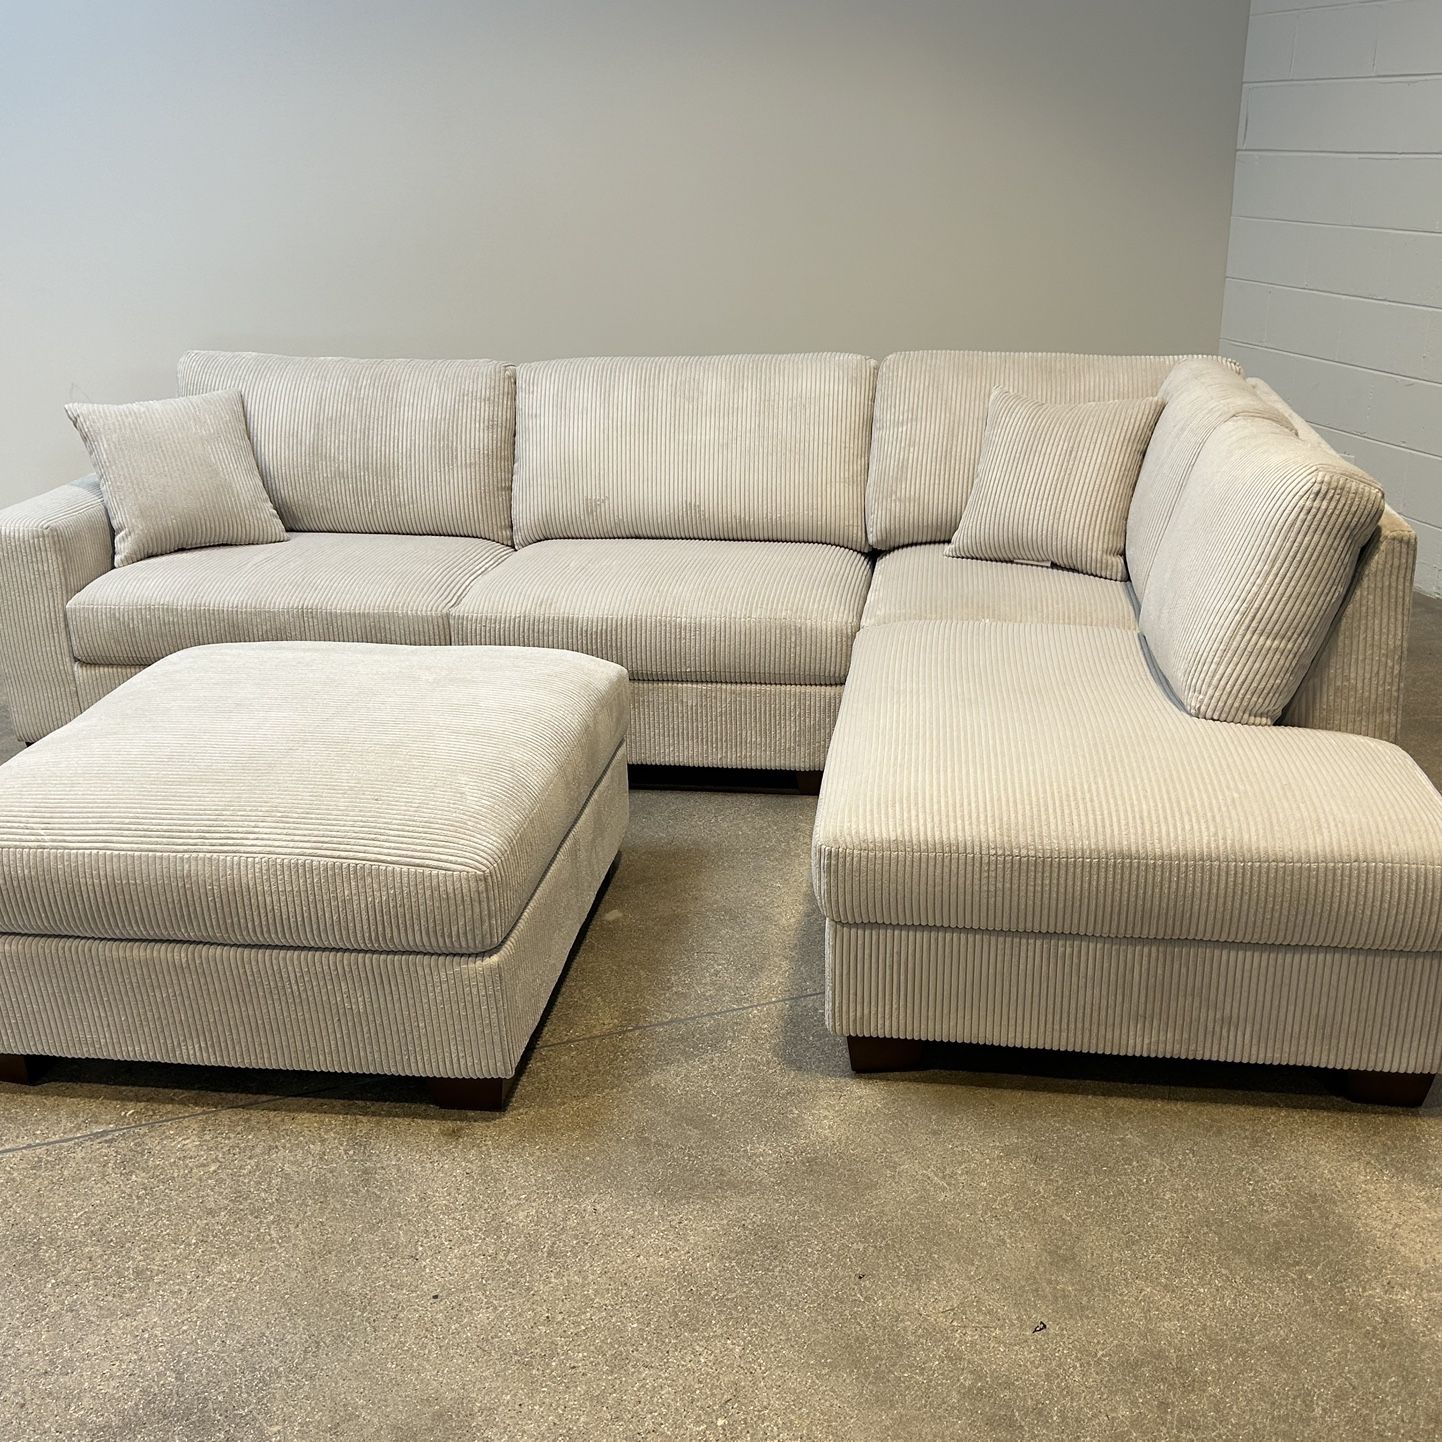 Thomasville 2-Piece Sectional Couch with matching Ottoman